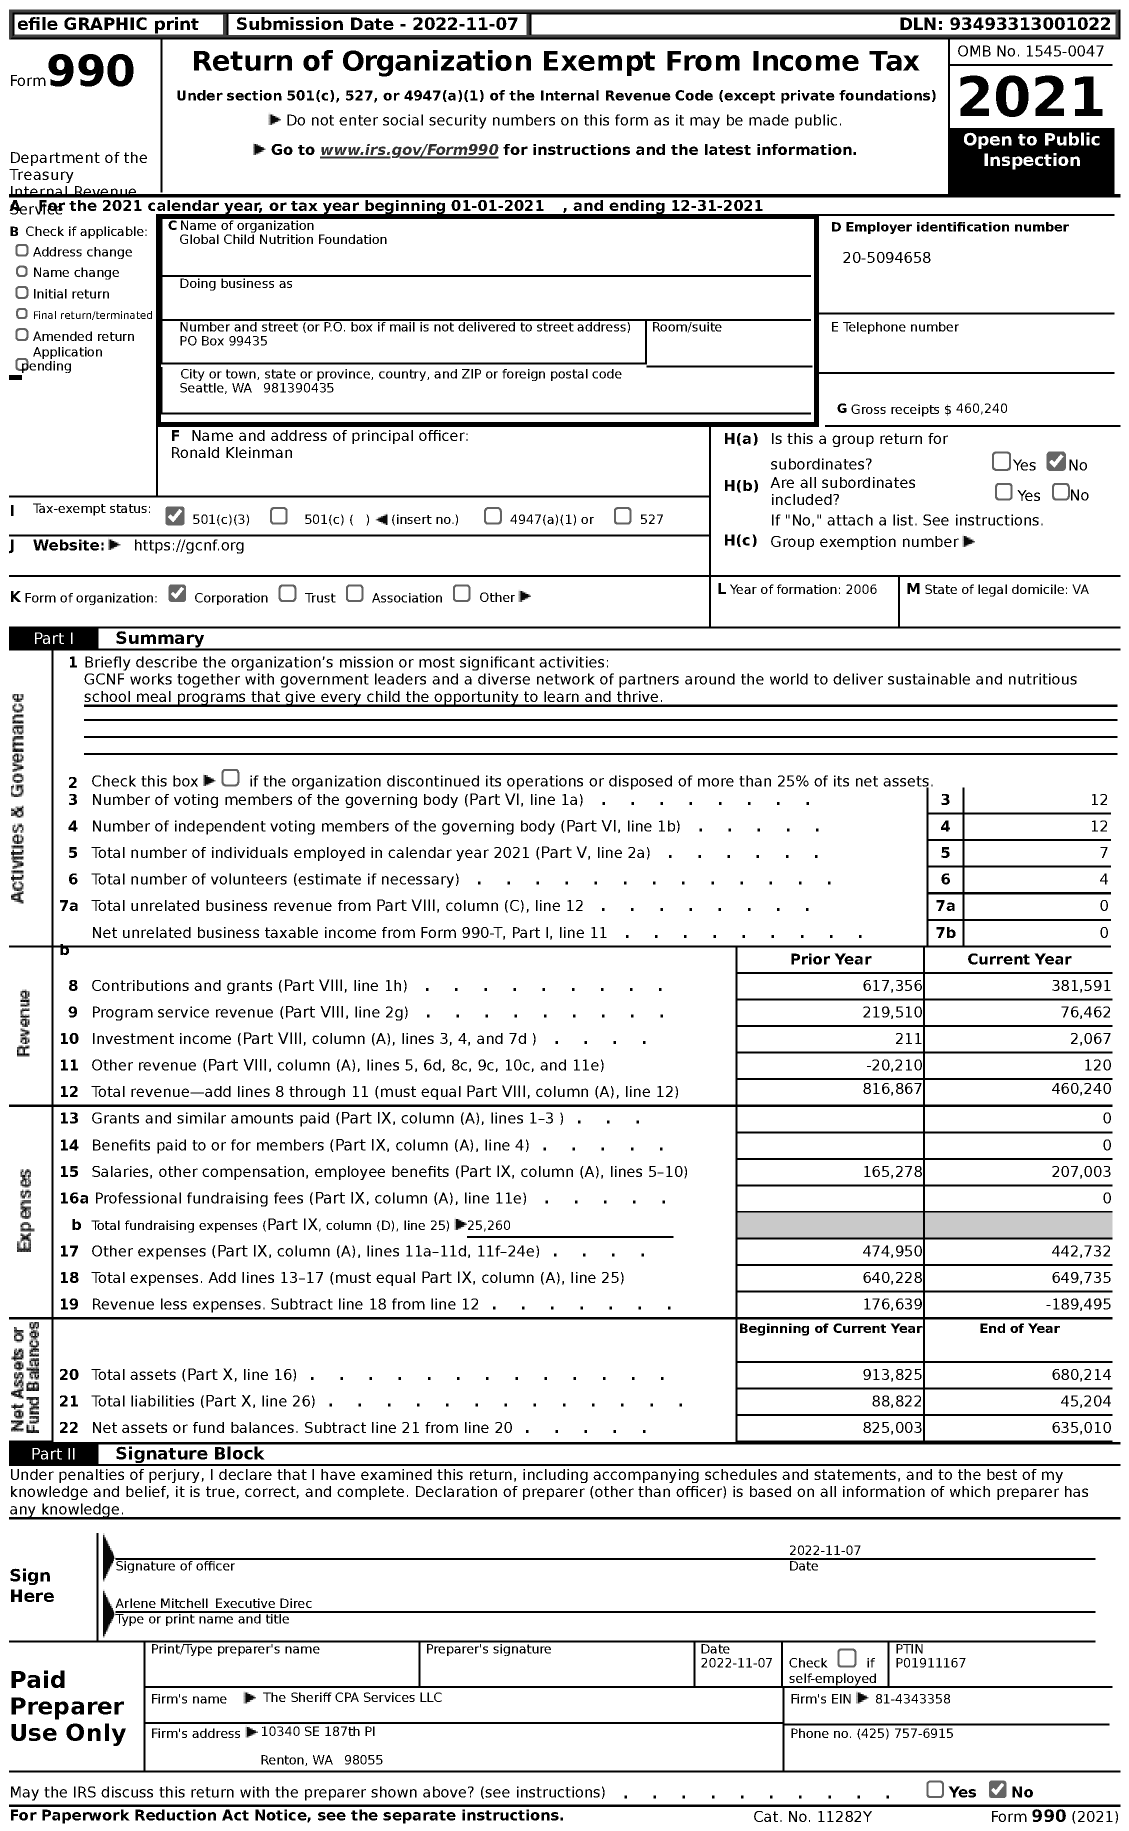 Image of first page of 2021 Form 990 for Global Child Nutrition Foundation